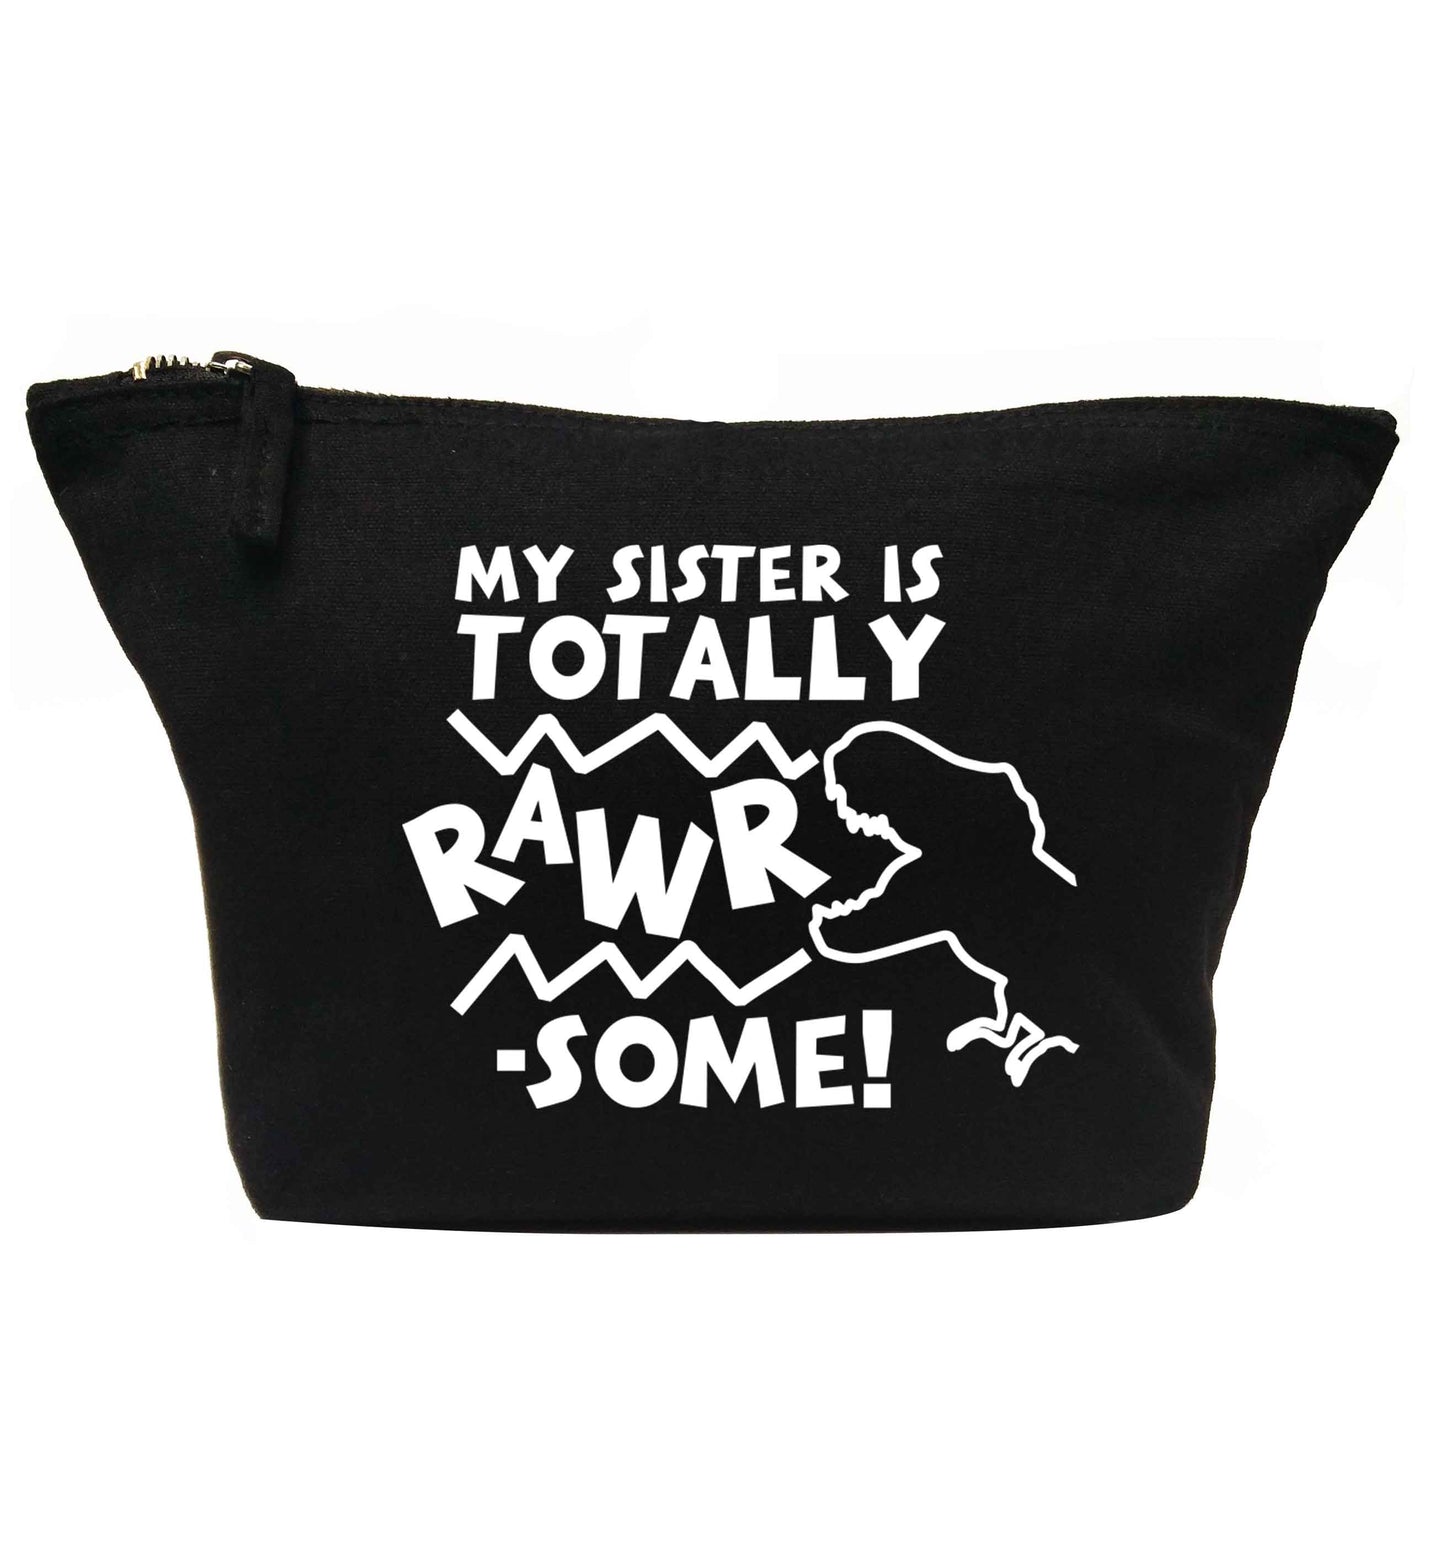 My sister is totally rawrsome | Makeup / wash bag